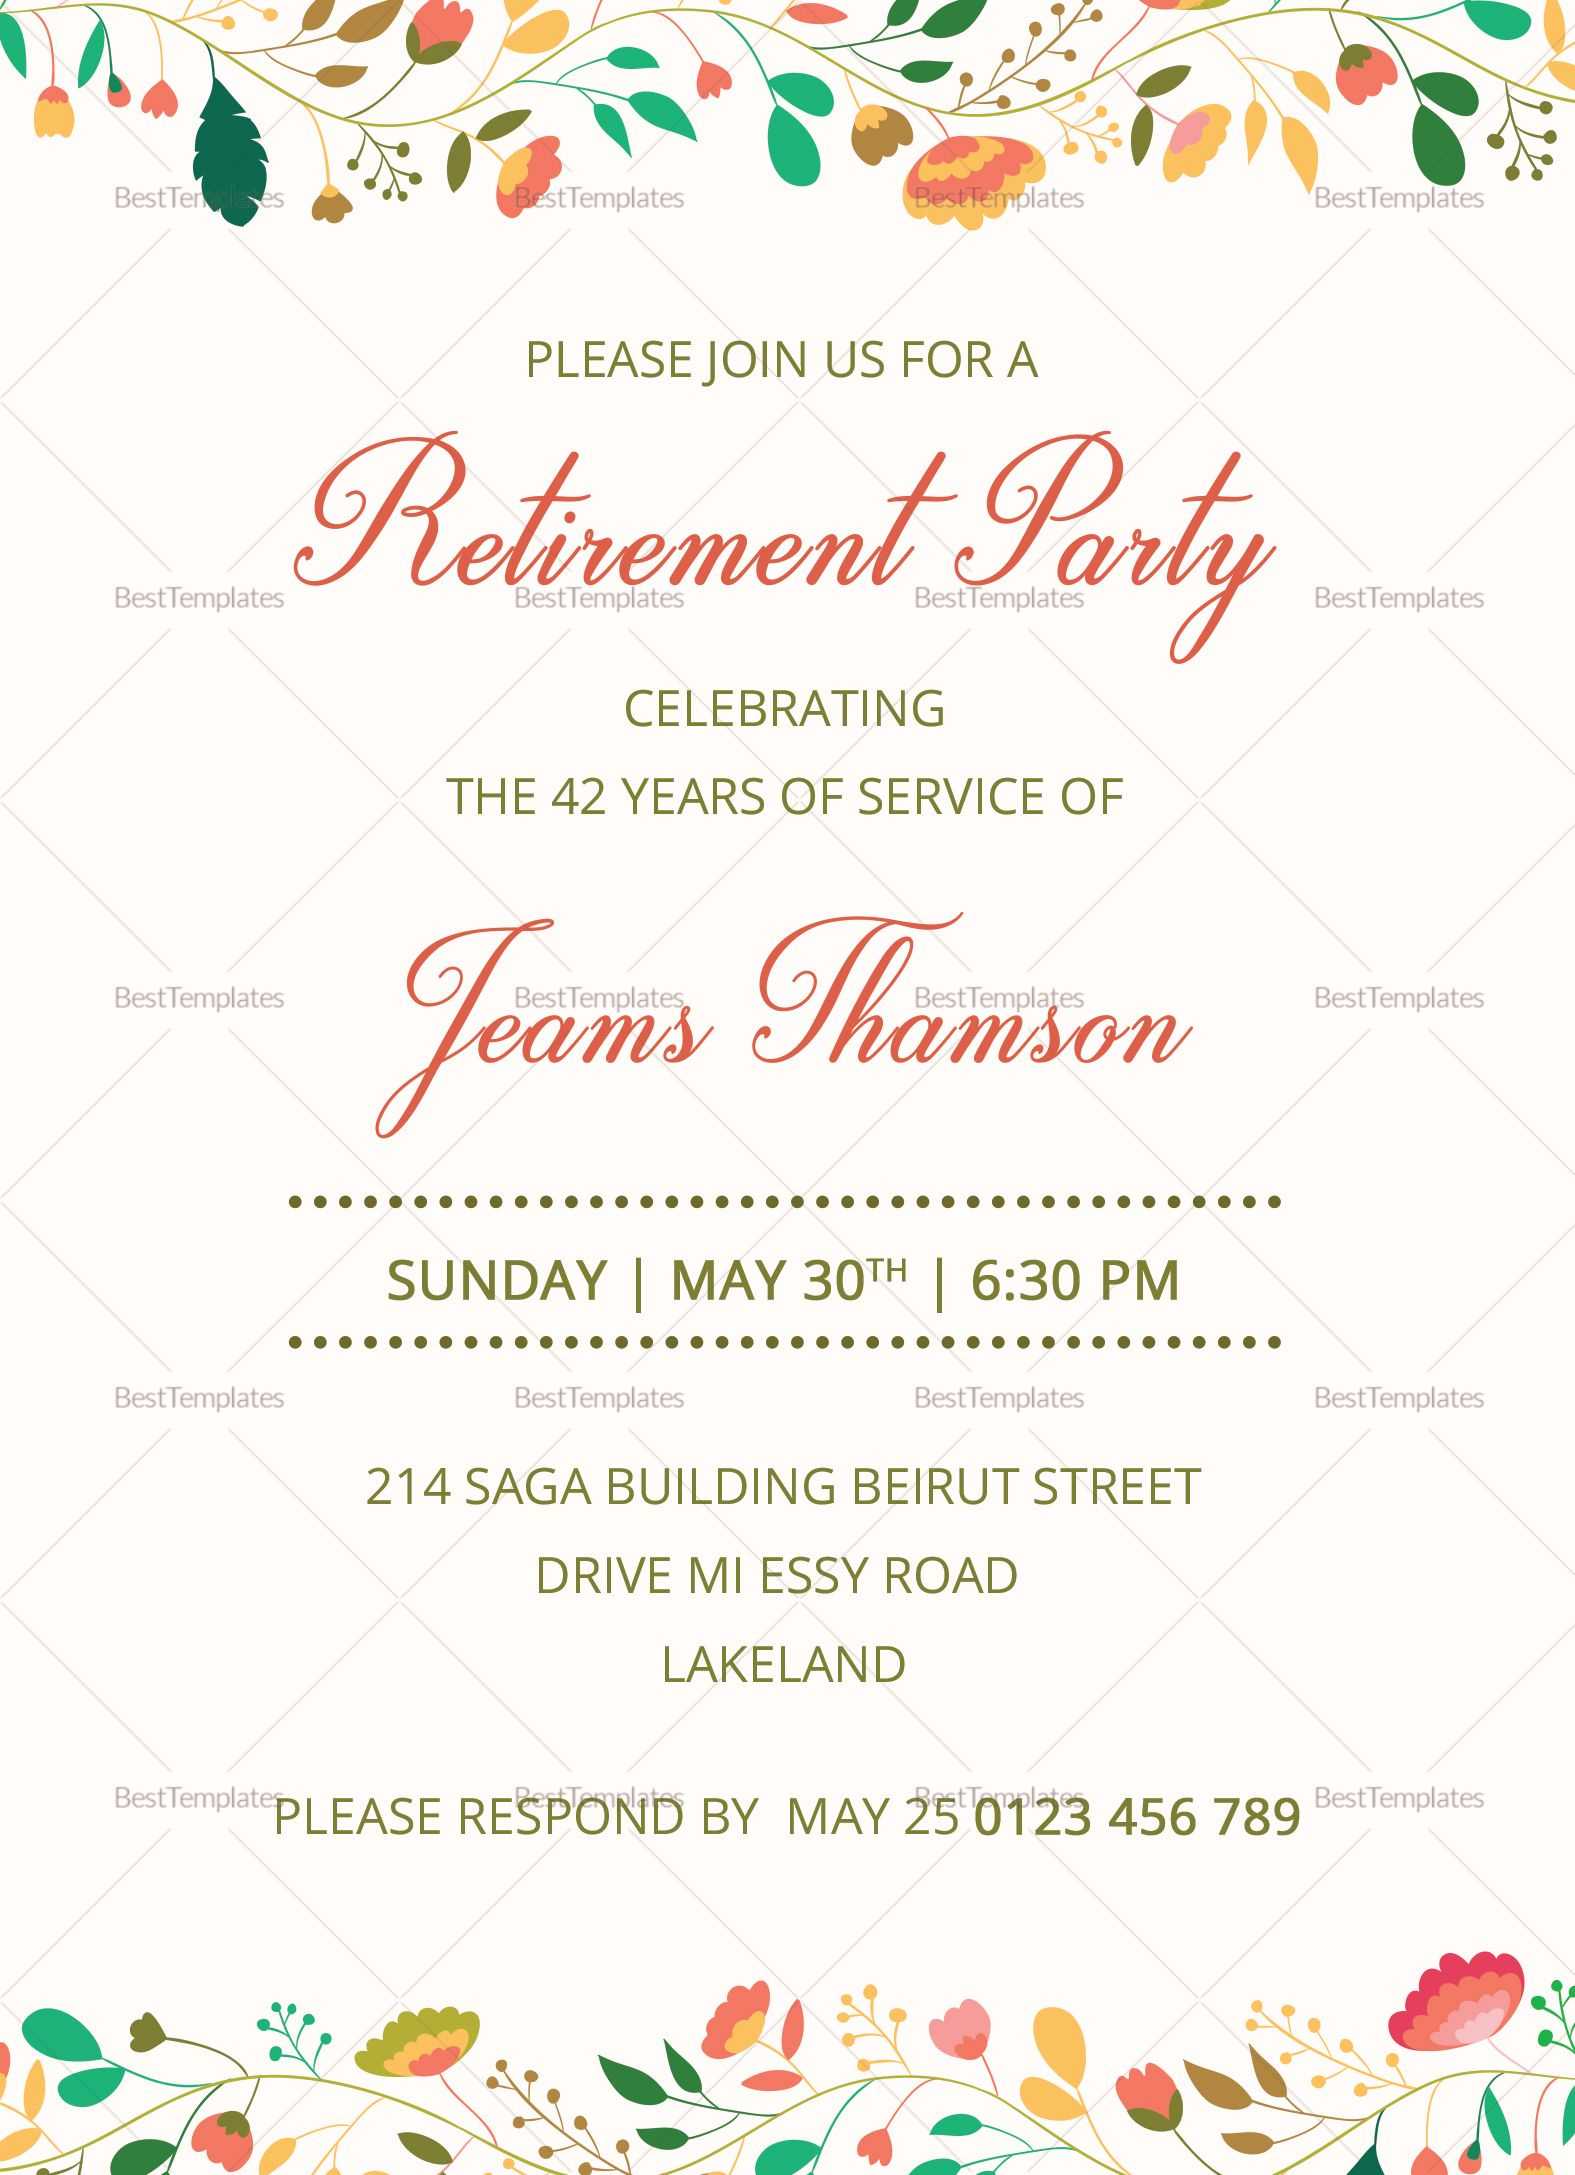 Pinm Haseem On Download | Retirement Party Invitations In Retirement Card Template